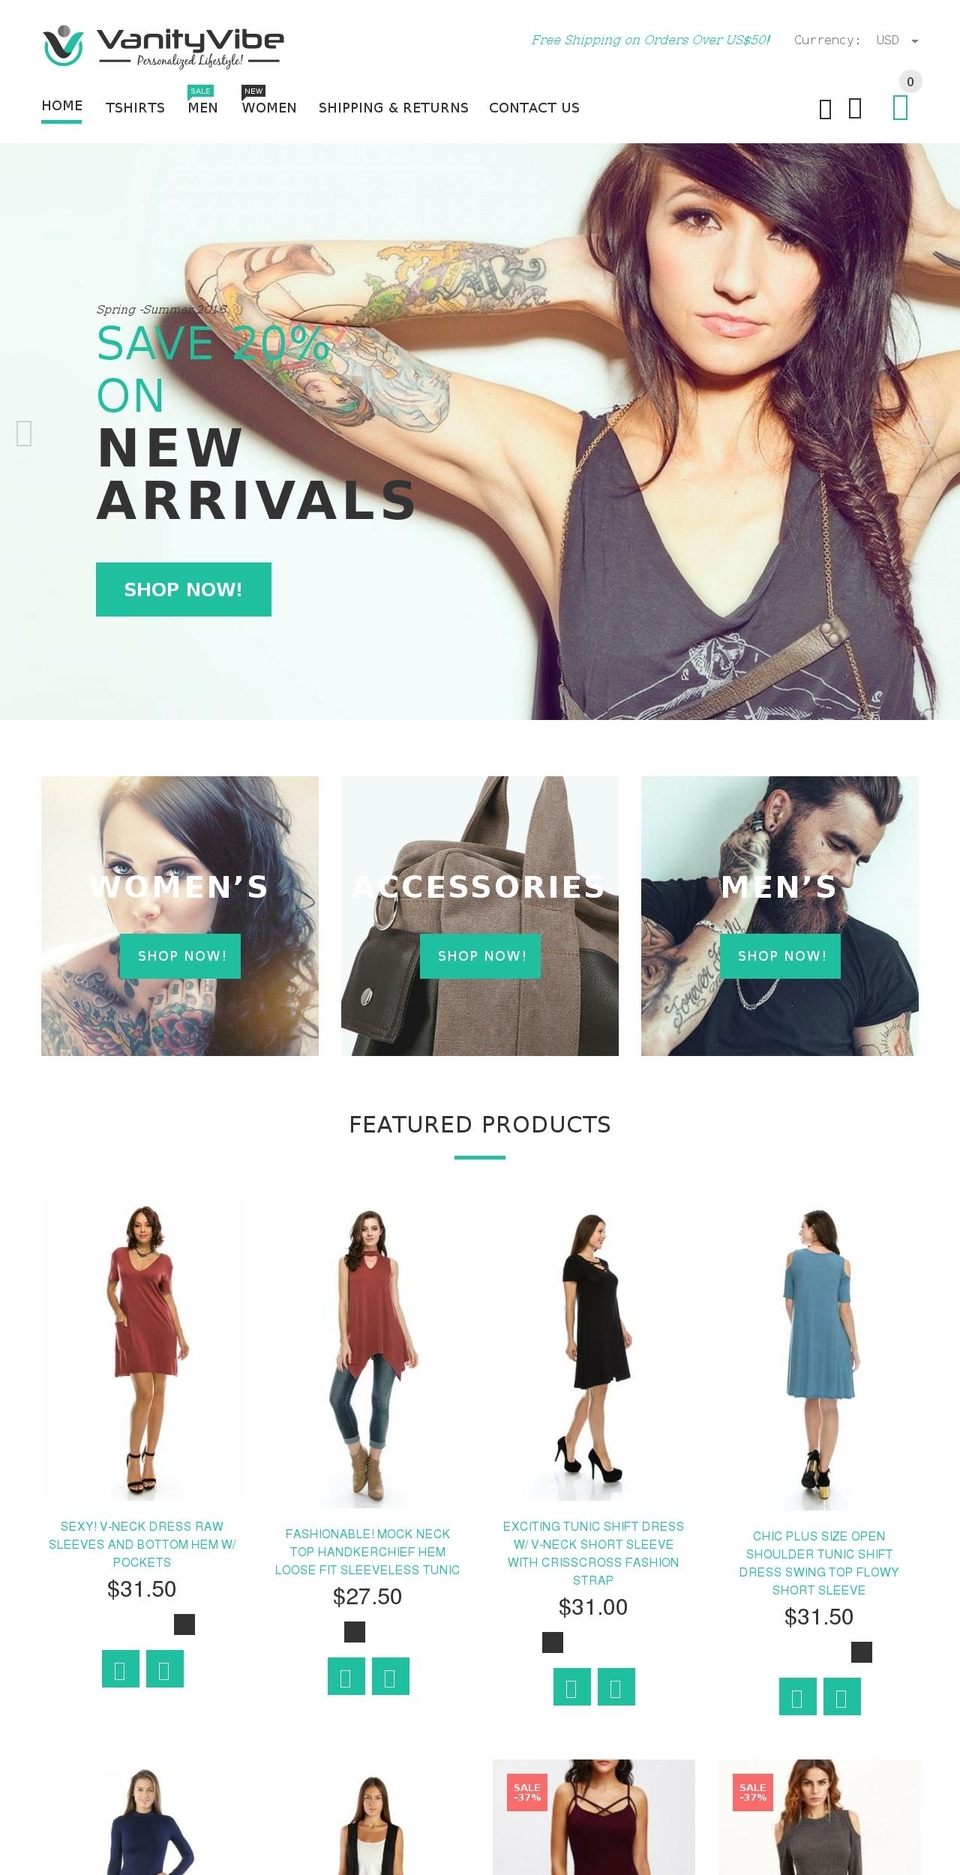 yourstore-v1-4-8 Shopify theme site example vanityvibe.com